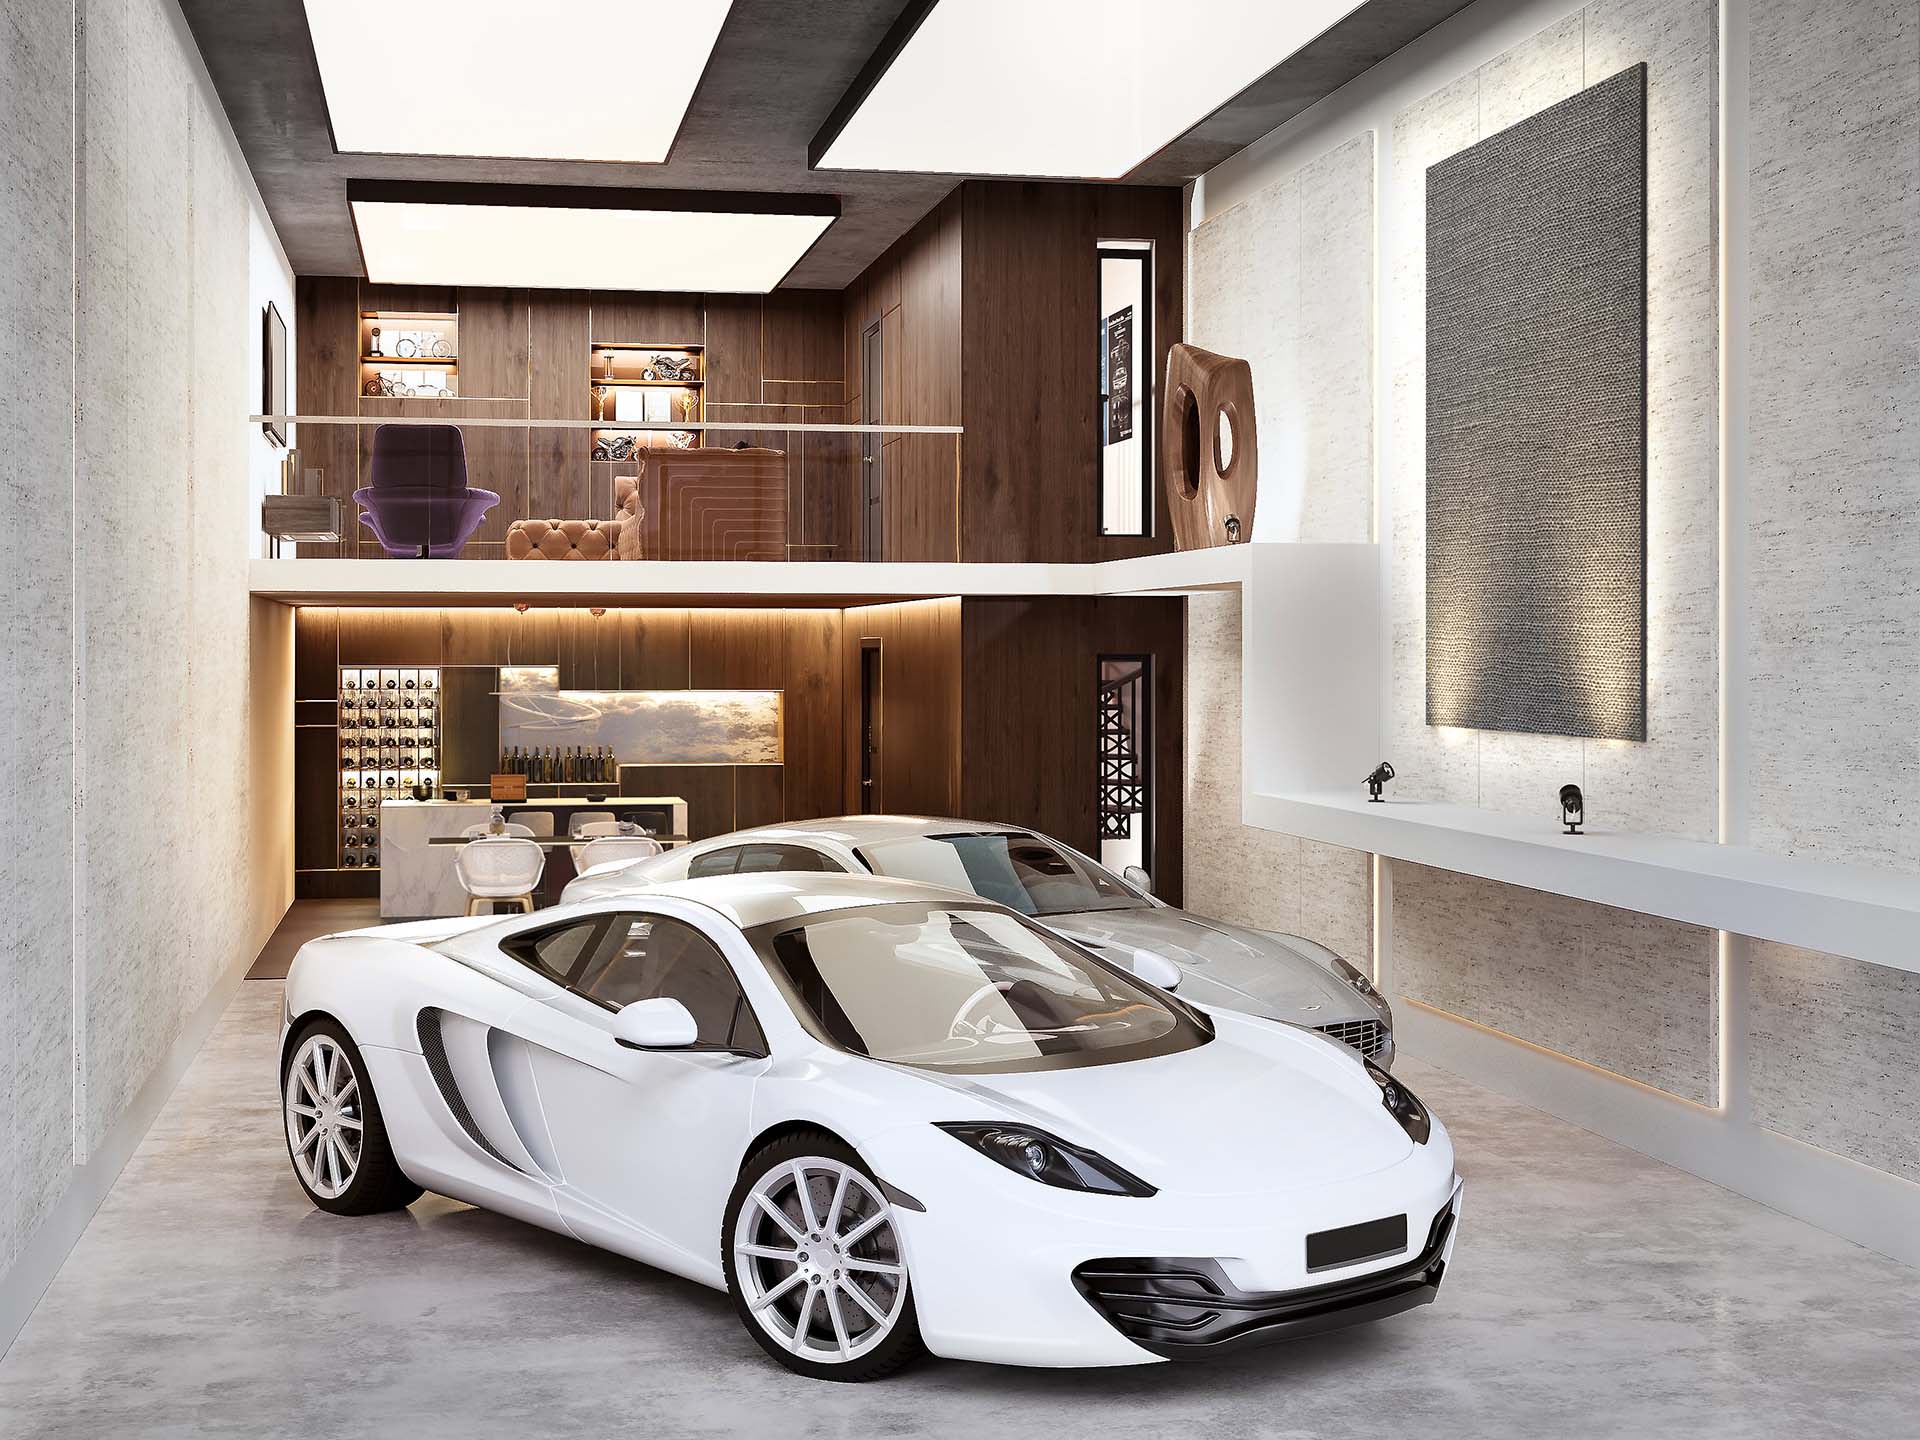 Retail Trove Goodwood Vancouver 3D Interior Architectural Rendering